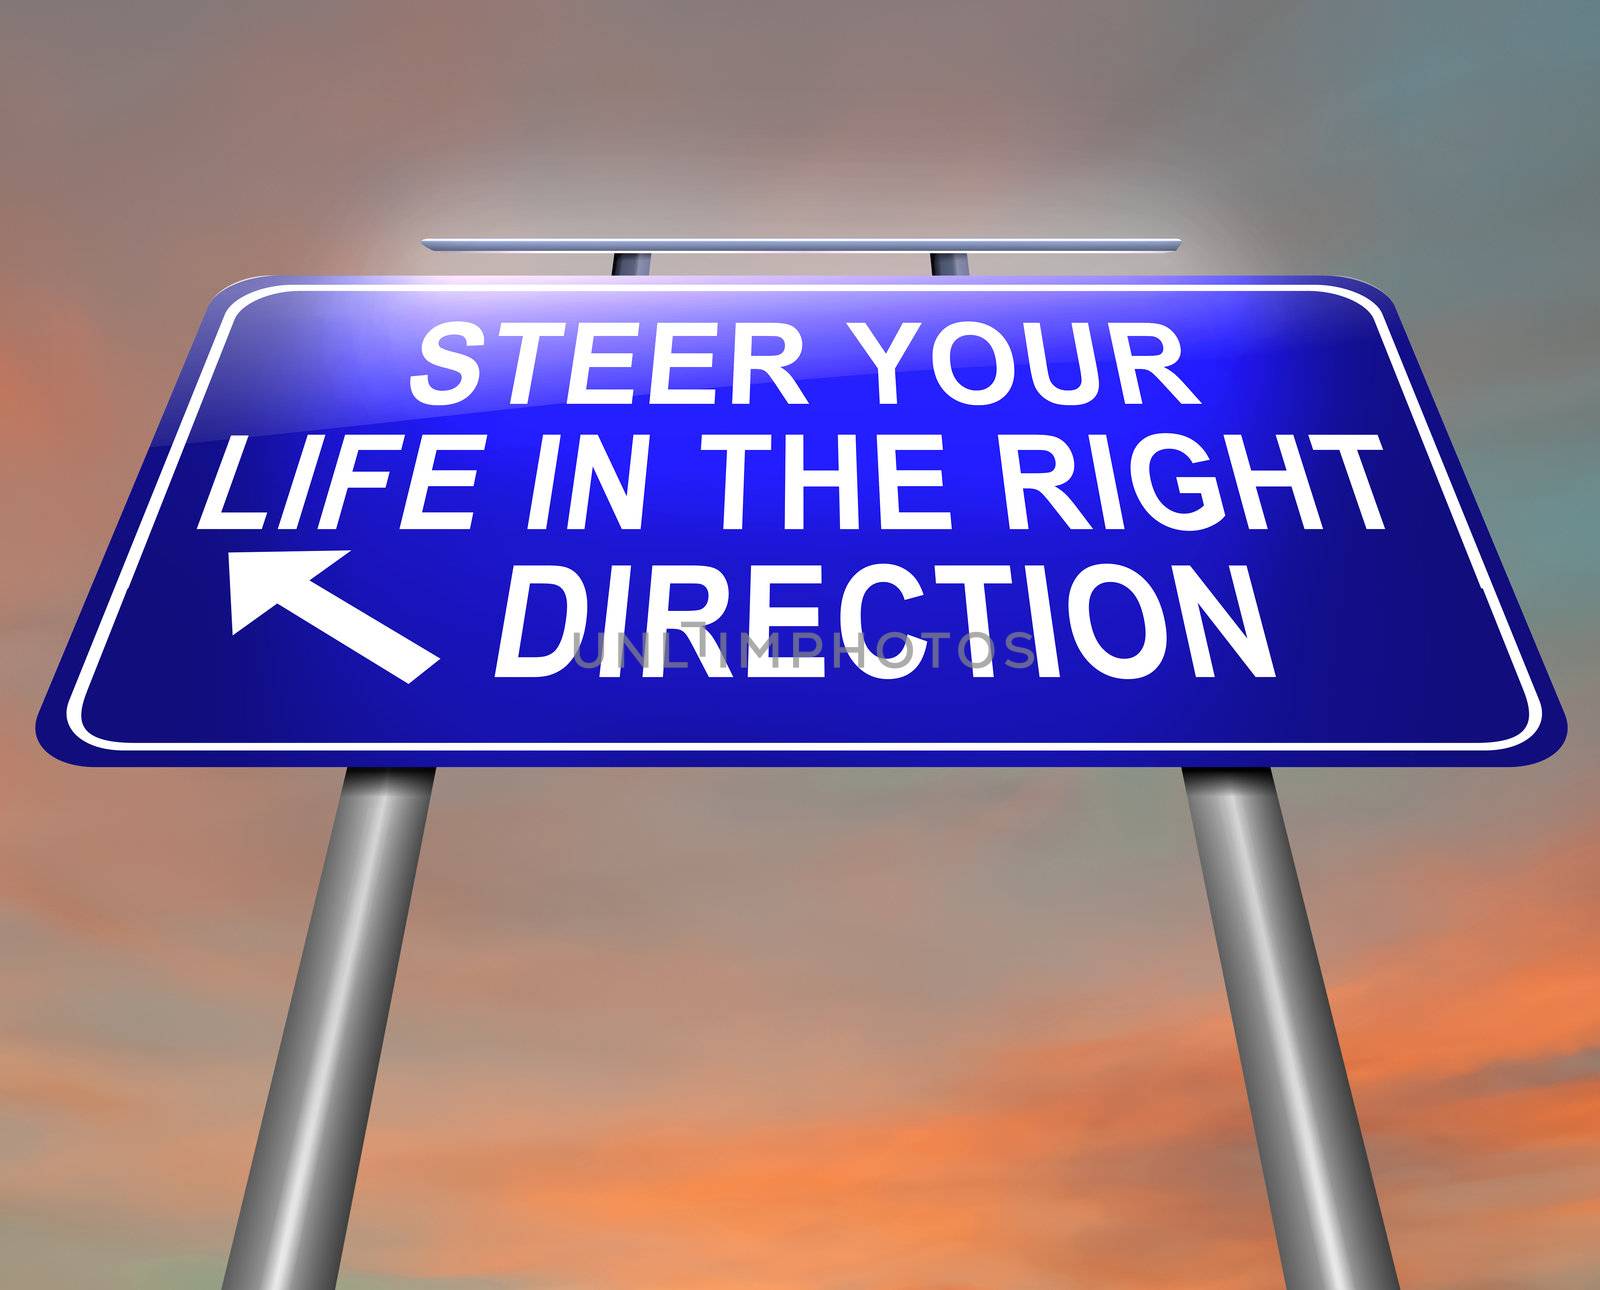 Illustration depicting an illuminated roadsign with a life direction concept. Dusk sky background.